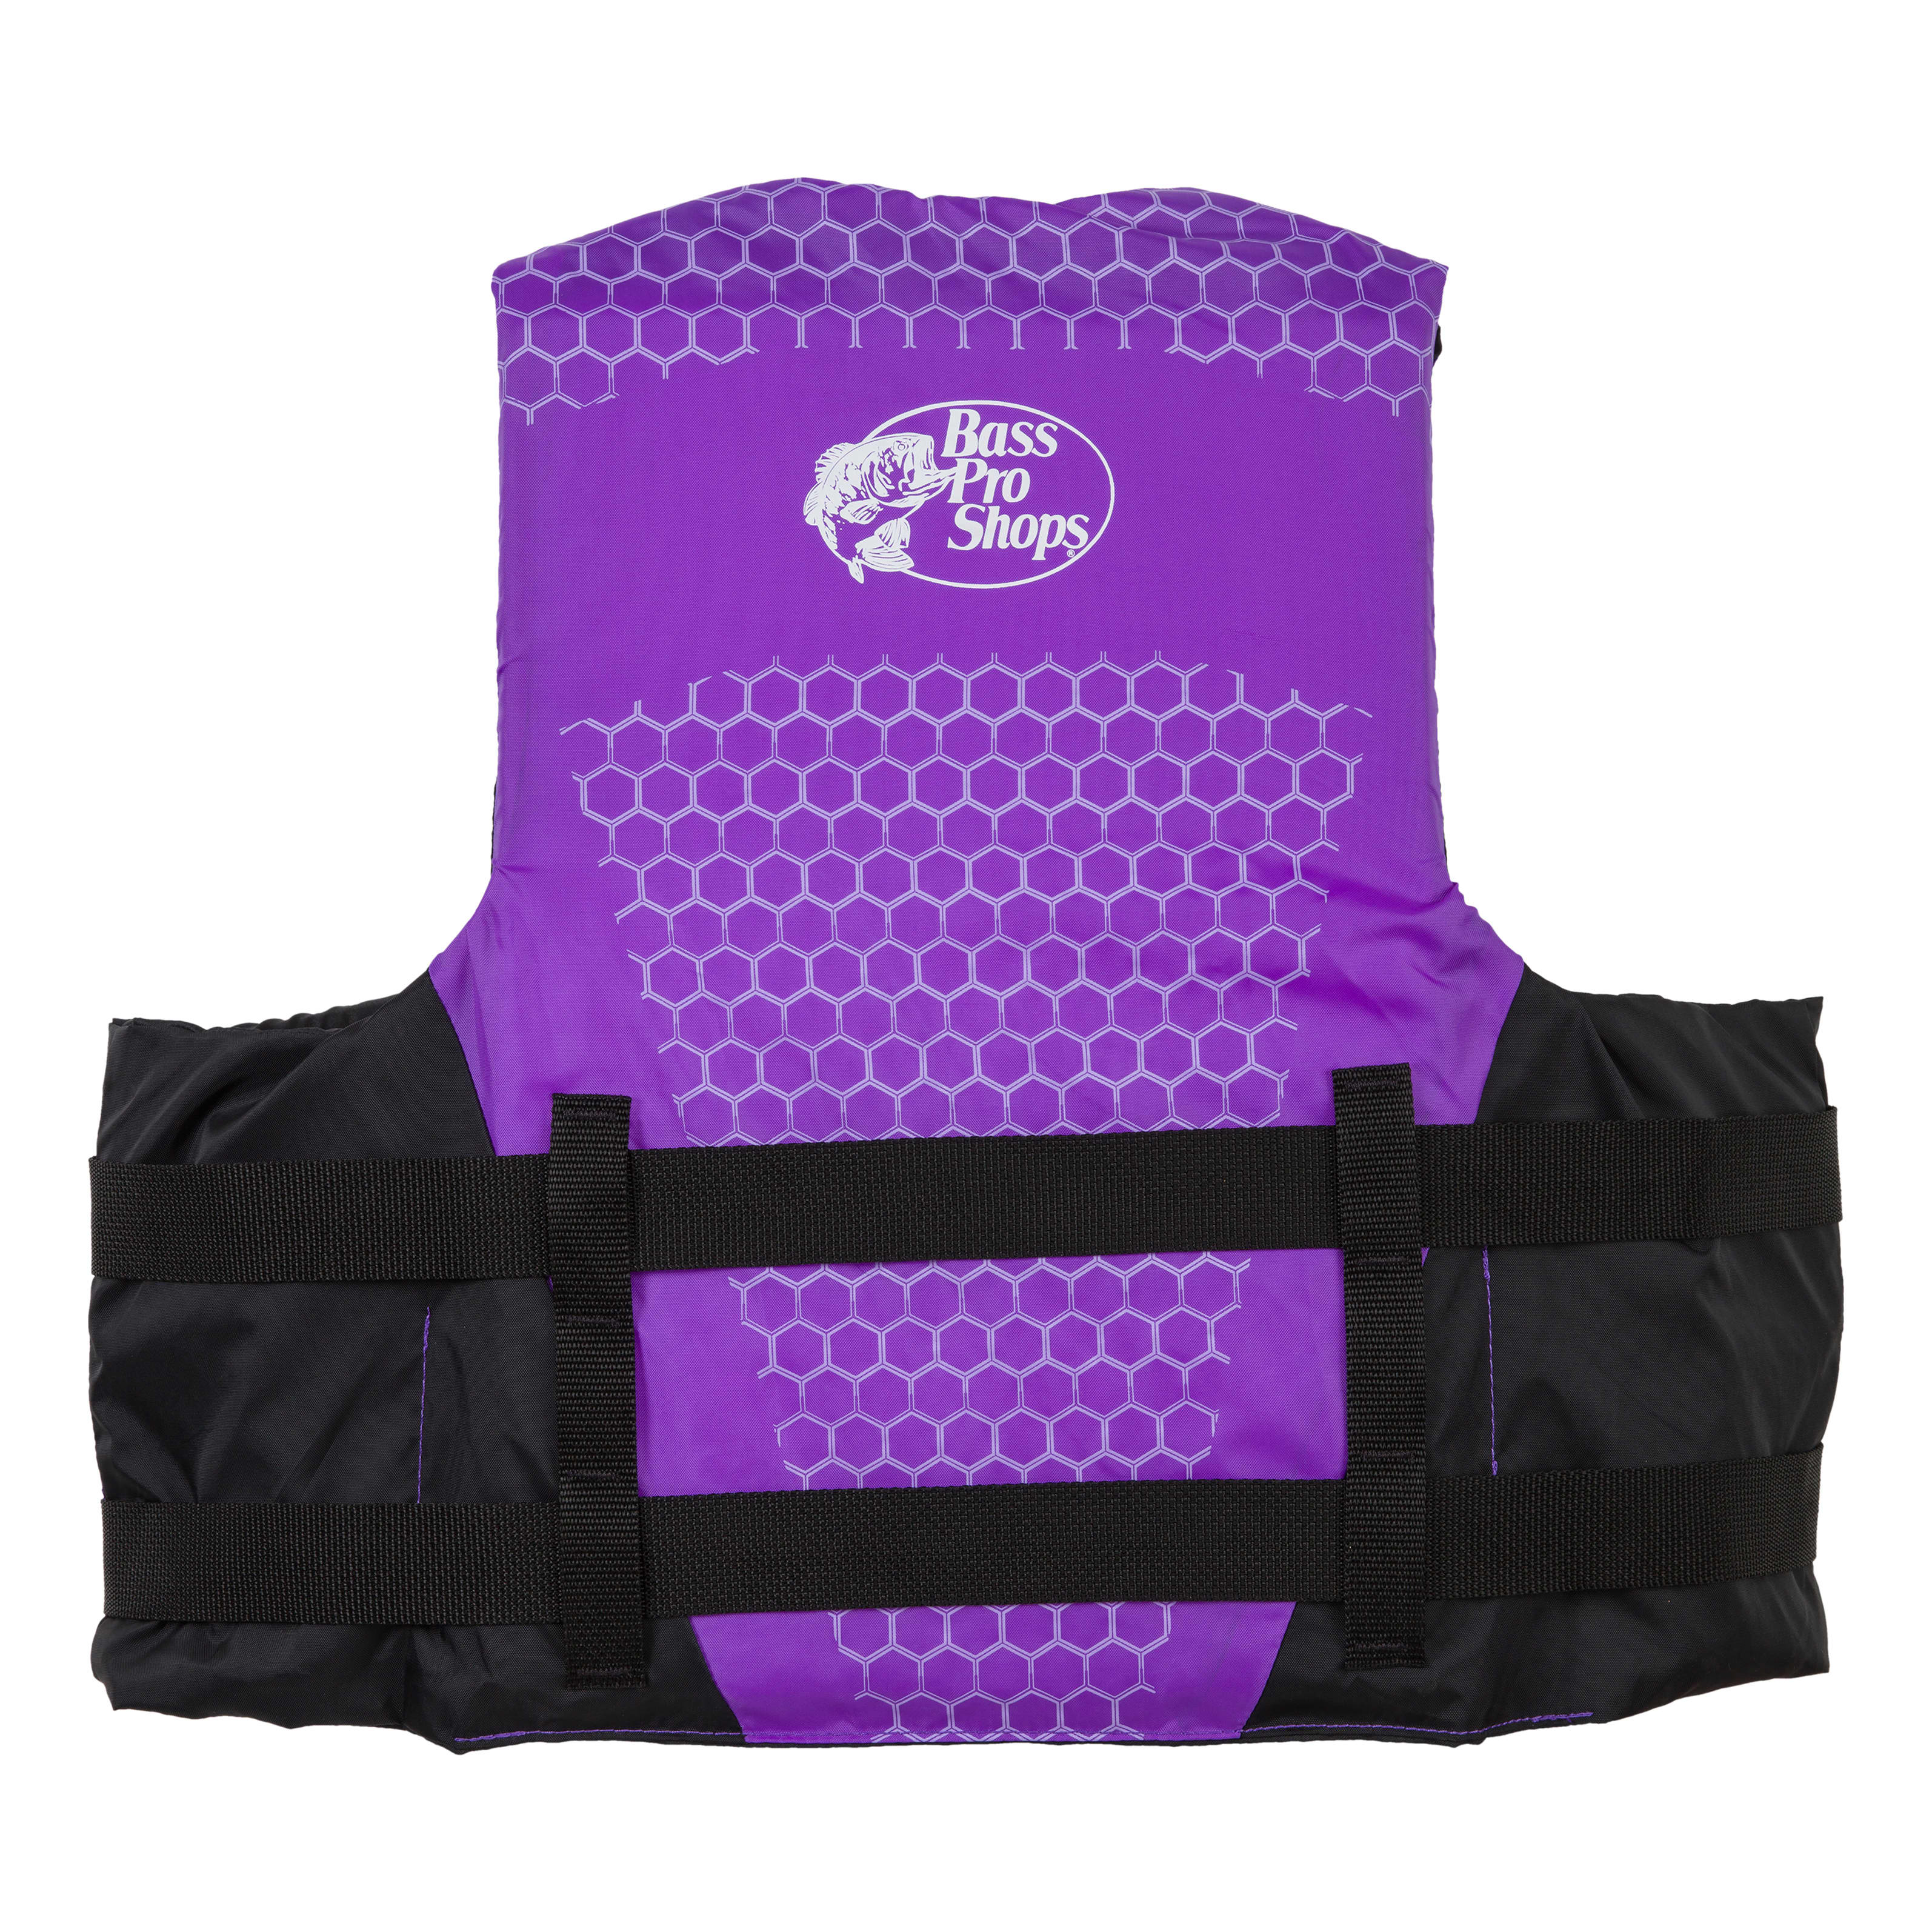 Bass Pro Shops® Traditional Water Ski/Recreational Life Jacket for Adults - Purple - Back View